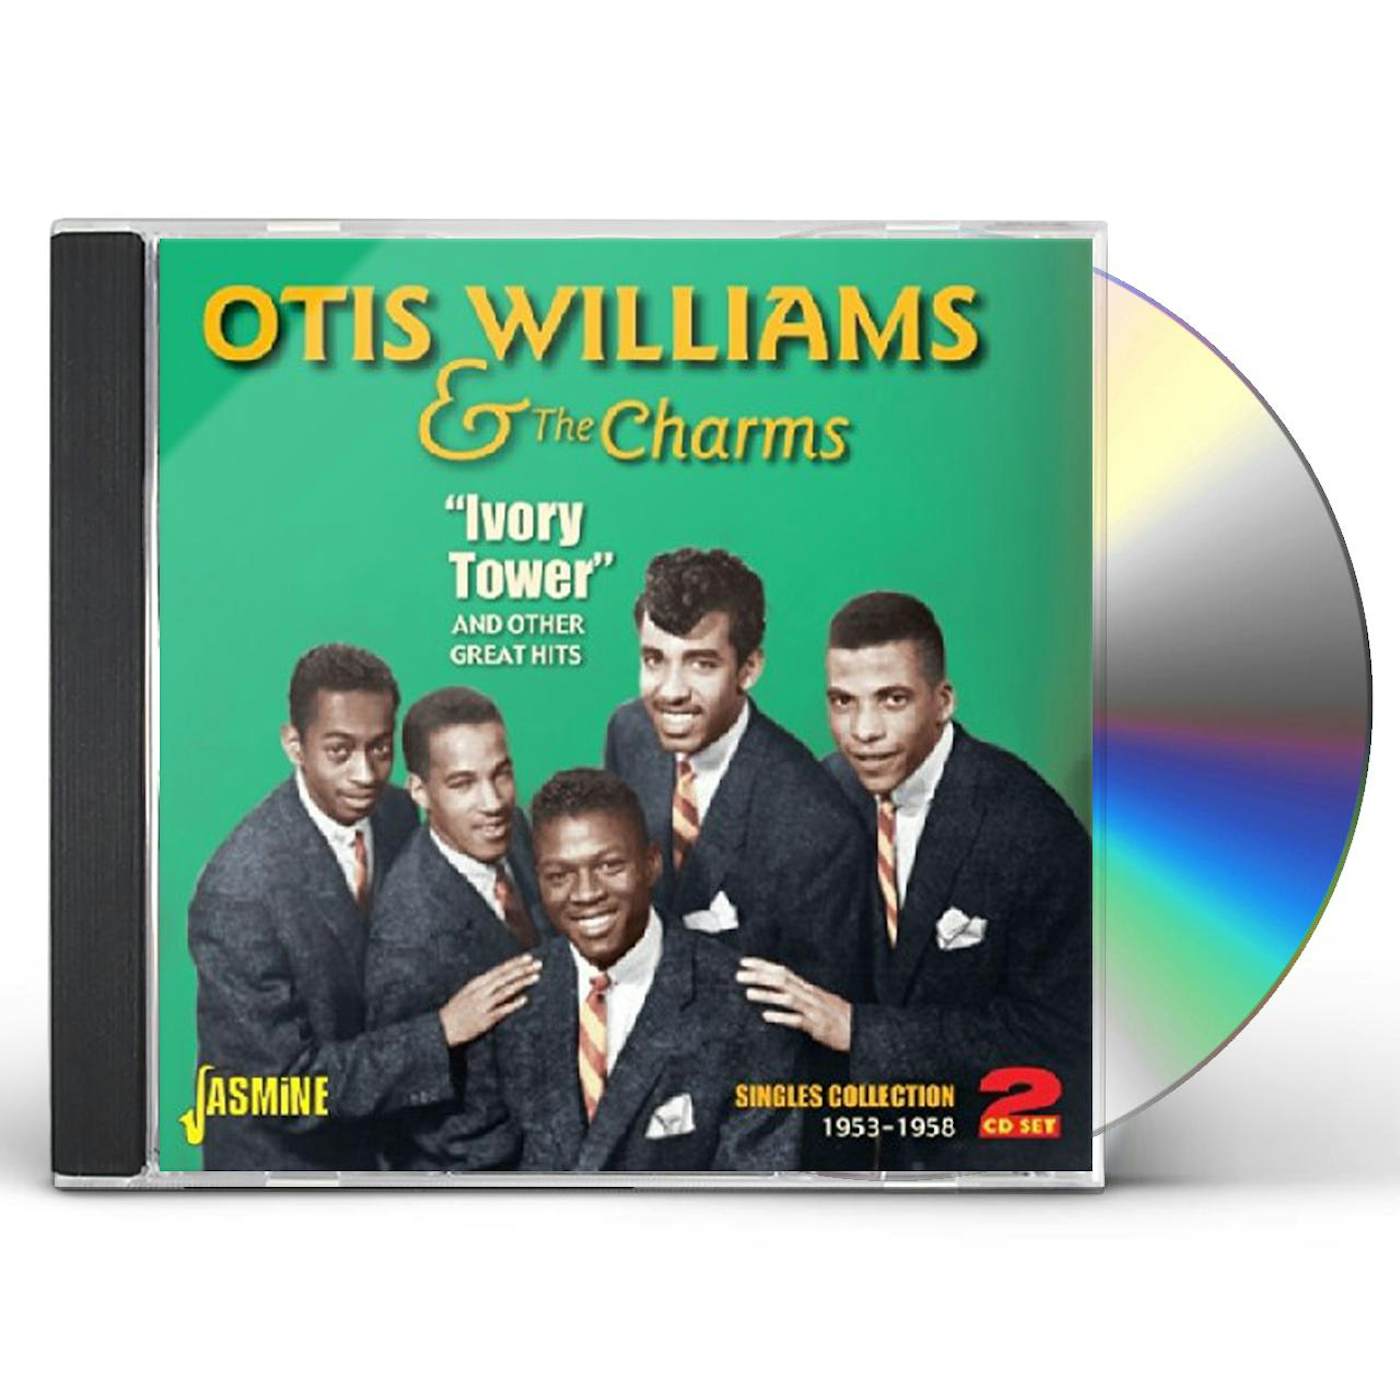 Otis Williams & The Charms IVORY TOWER & OTHER GREAT HITS CD